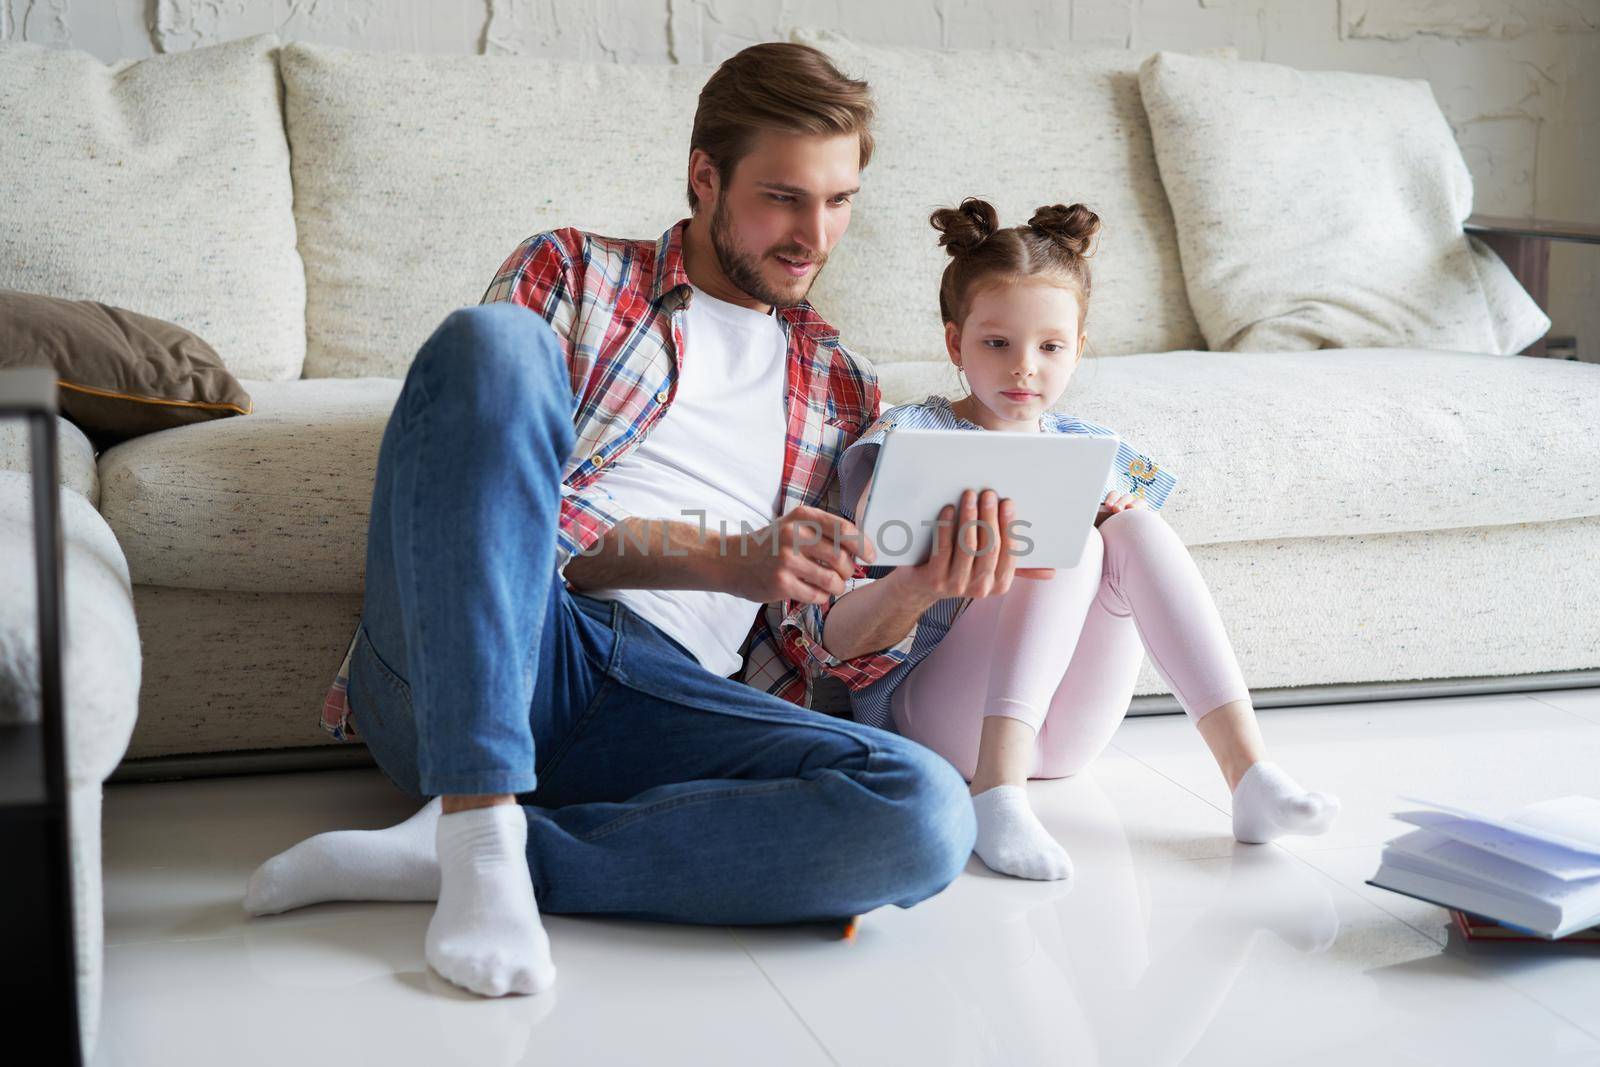 Smiling father and daughter sitting on floor in living room with digital tablet, teaching lessons. by tsyhun